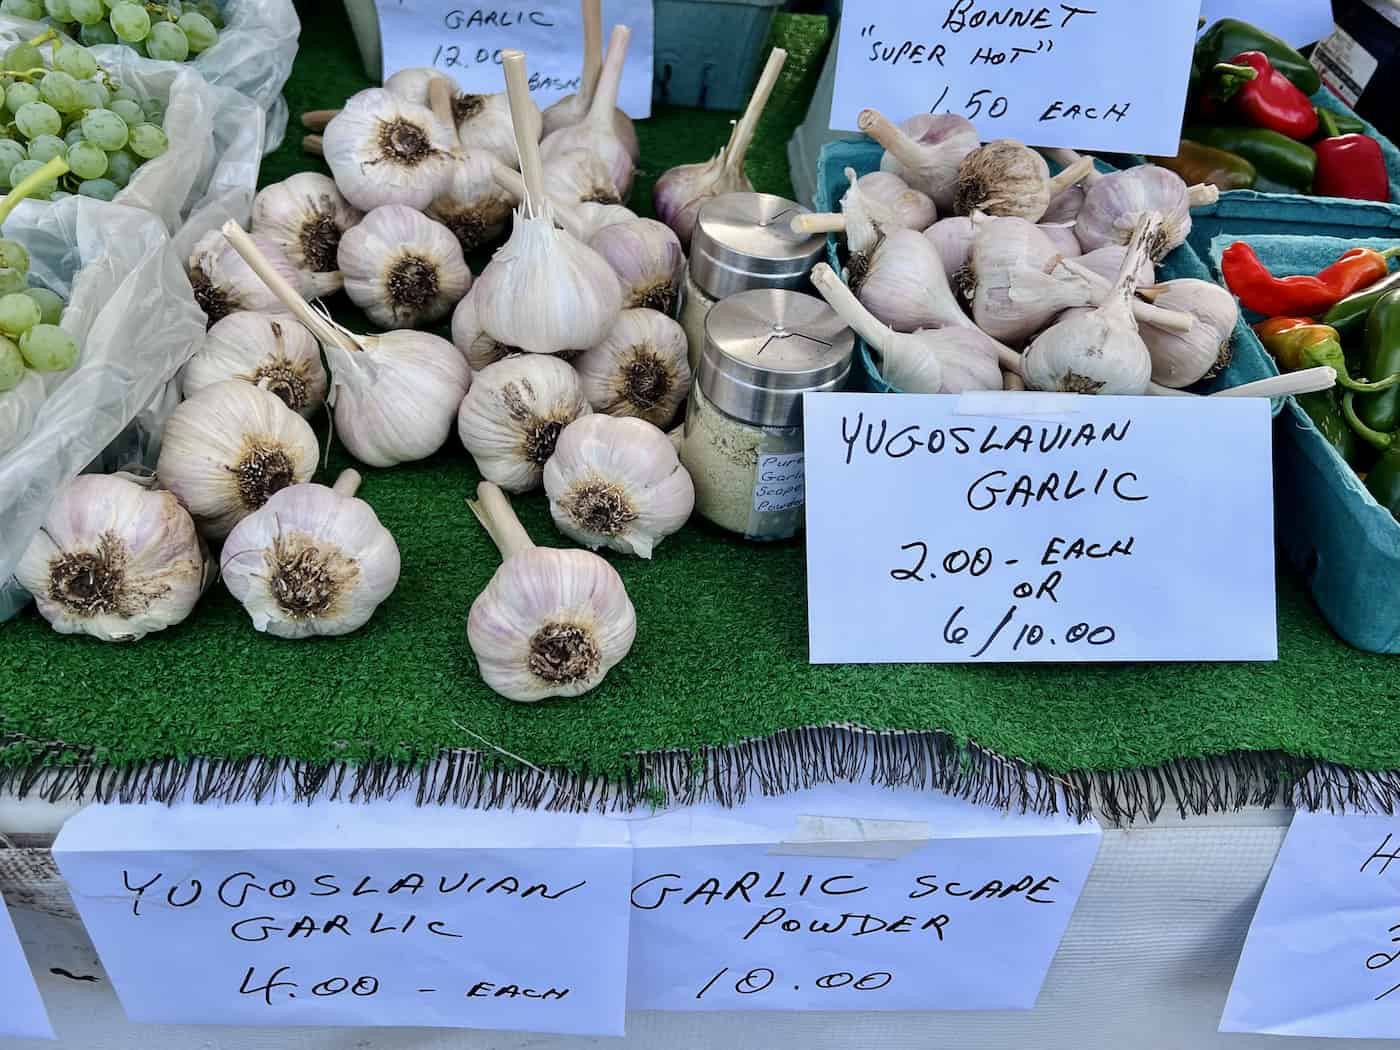 Look for seed garlic at the farmers market in the fall